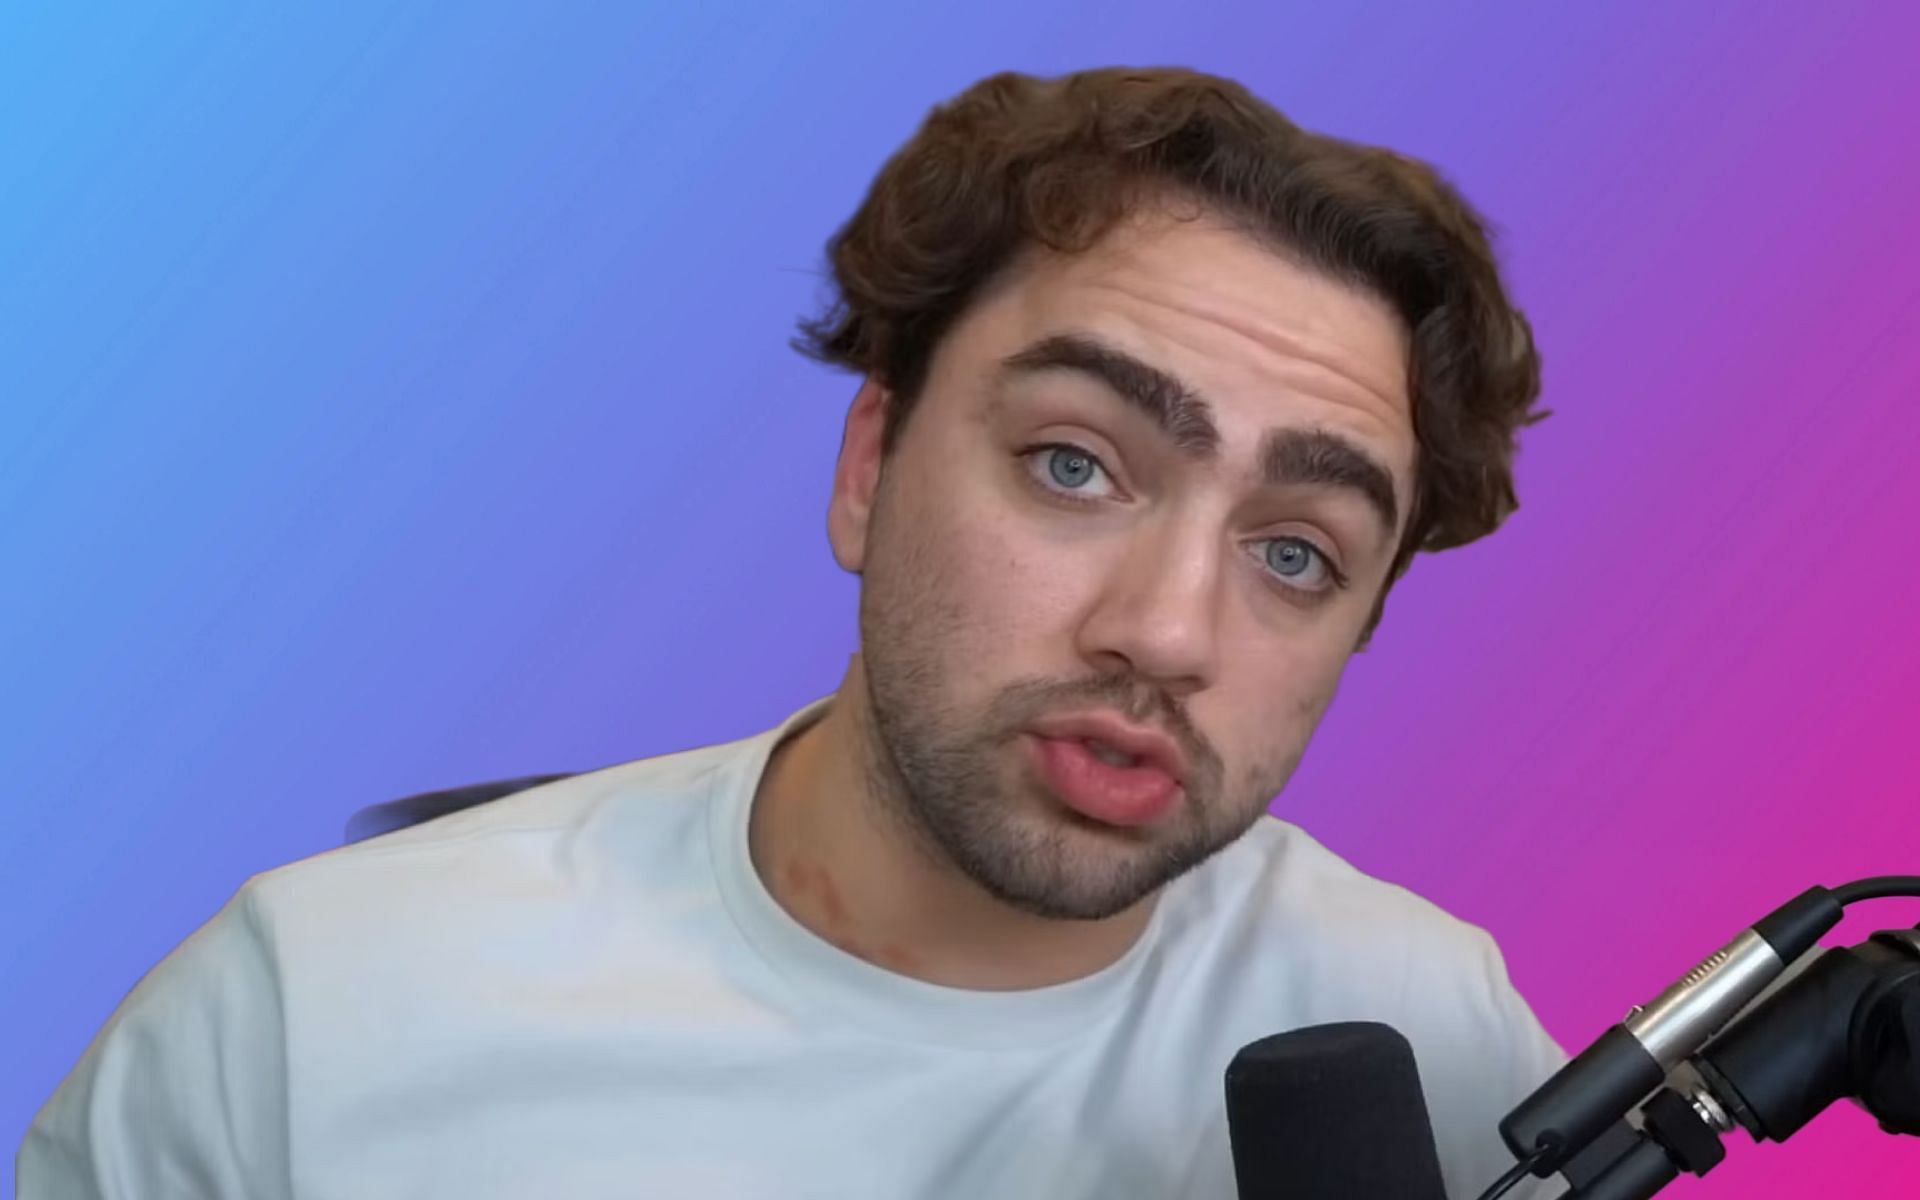 Mizkif returned to Twitch after serving a 24-hour ban on January 17, 2023 (Image via Sportskeeda)